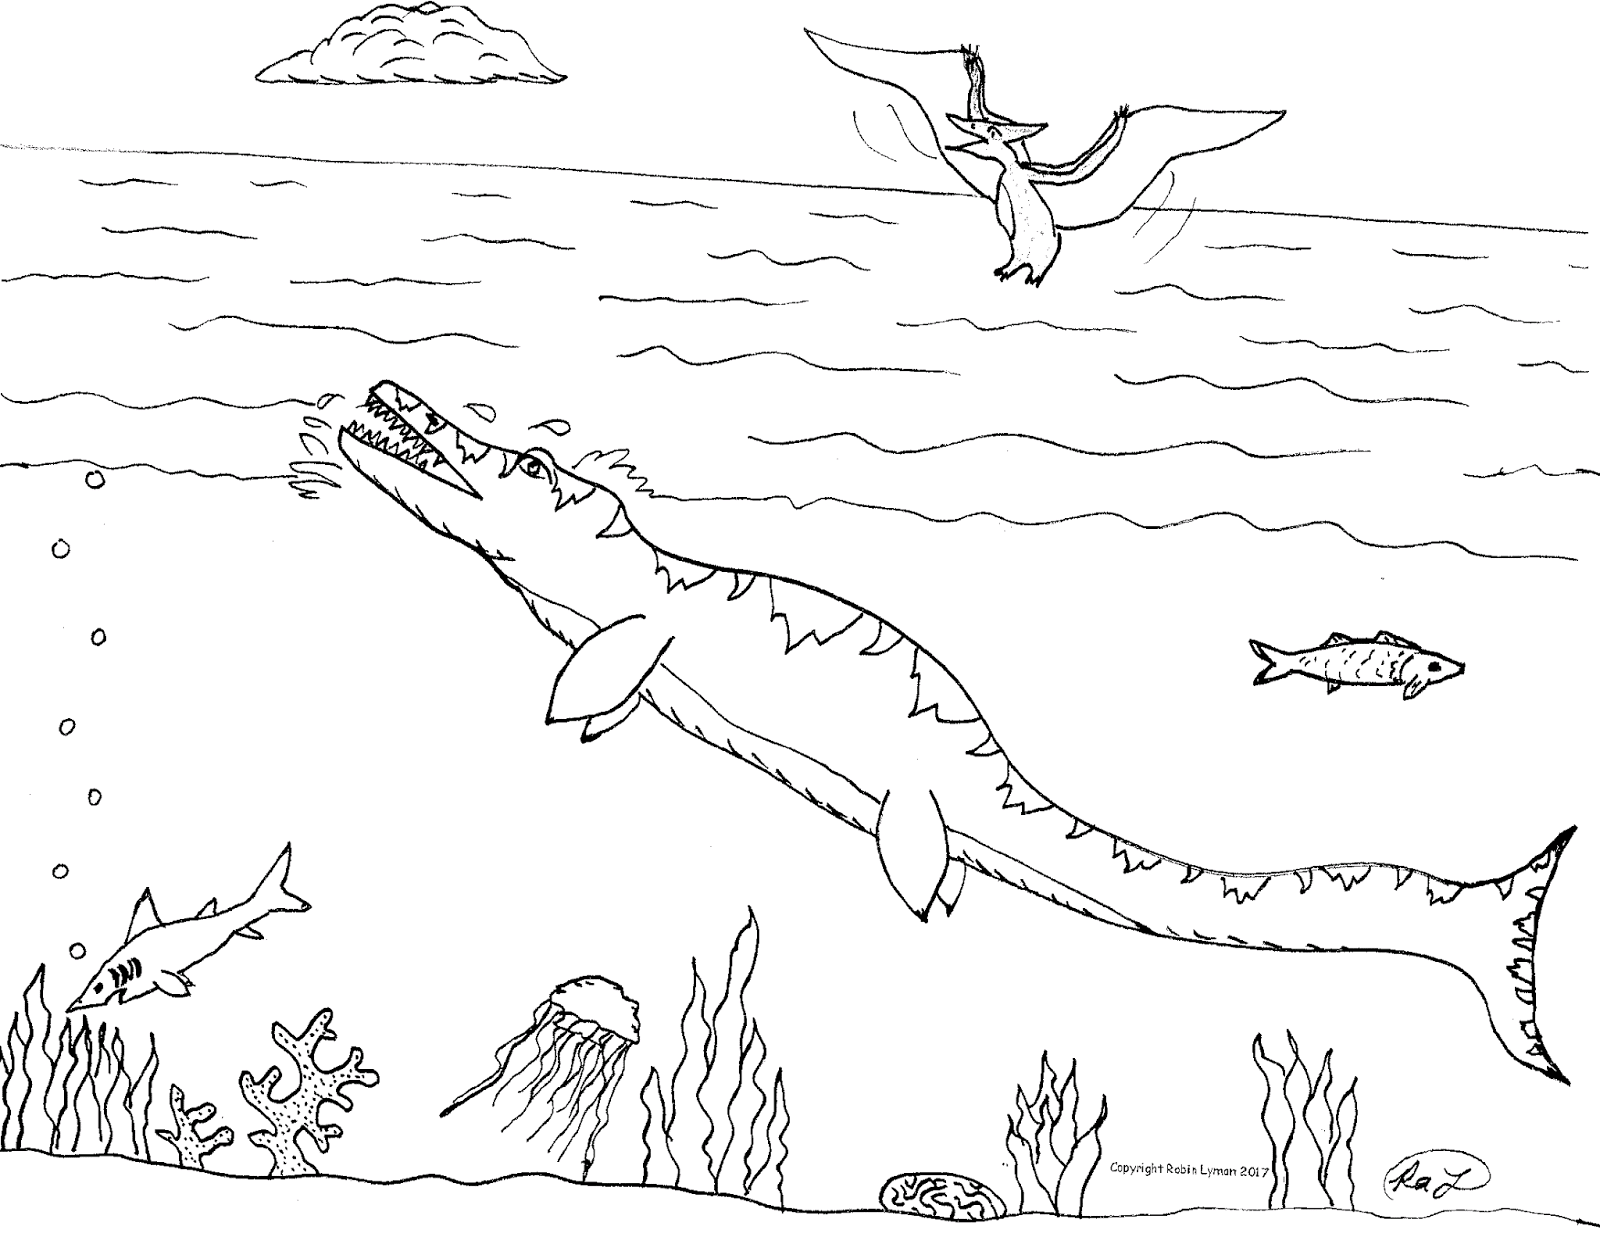 Download Robin's Great Coloring Pages: Tylosaurus the Mosasaur